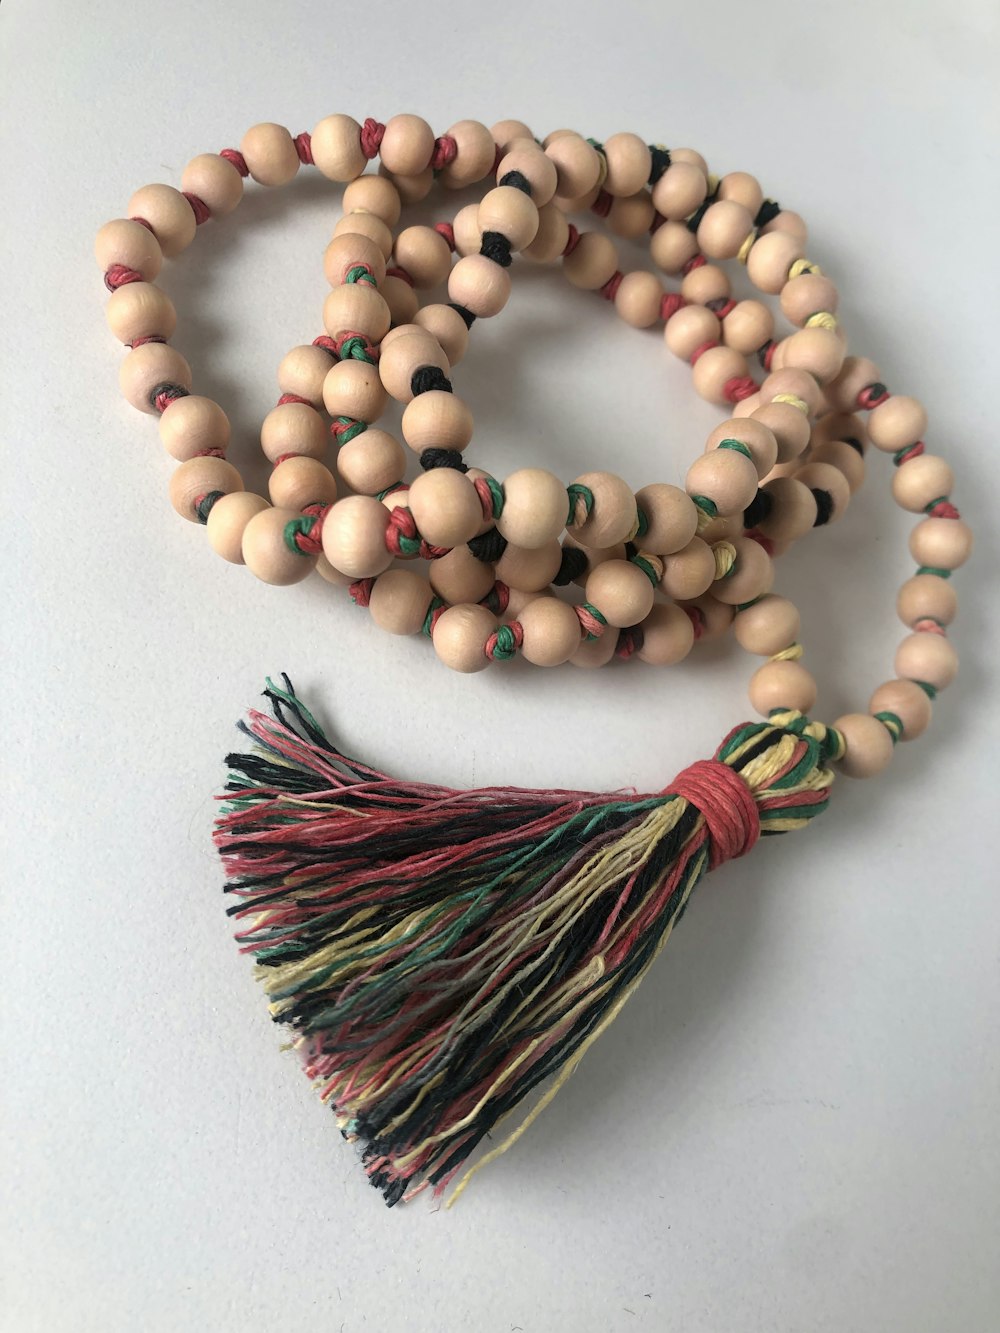 a colorful beaded necklace